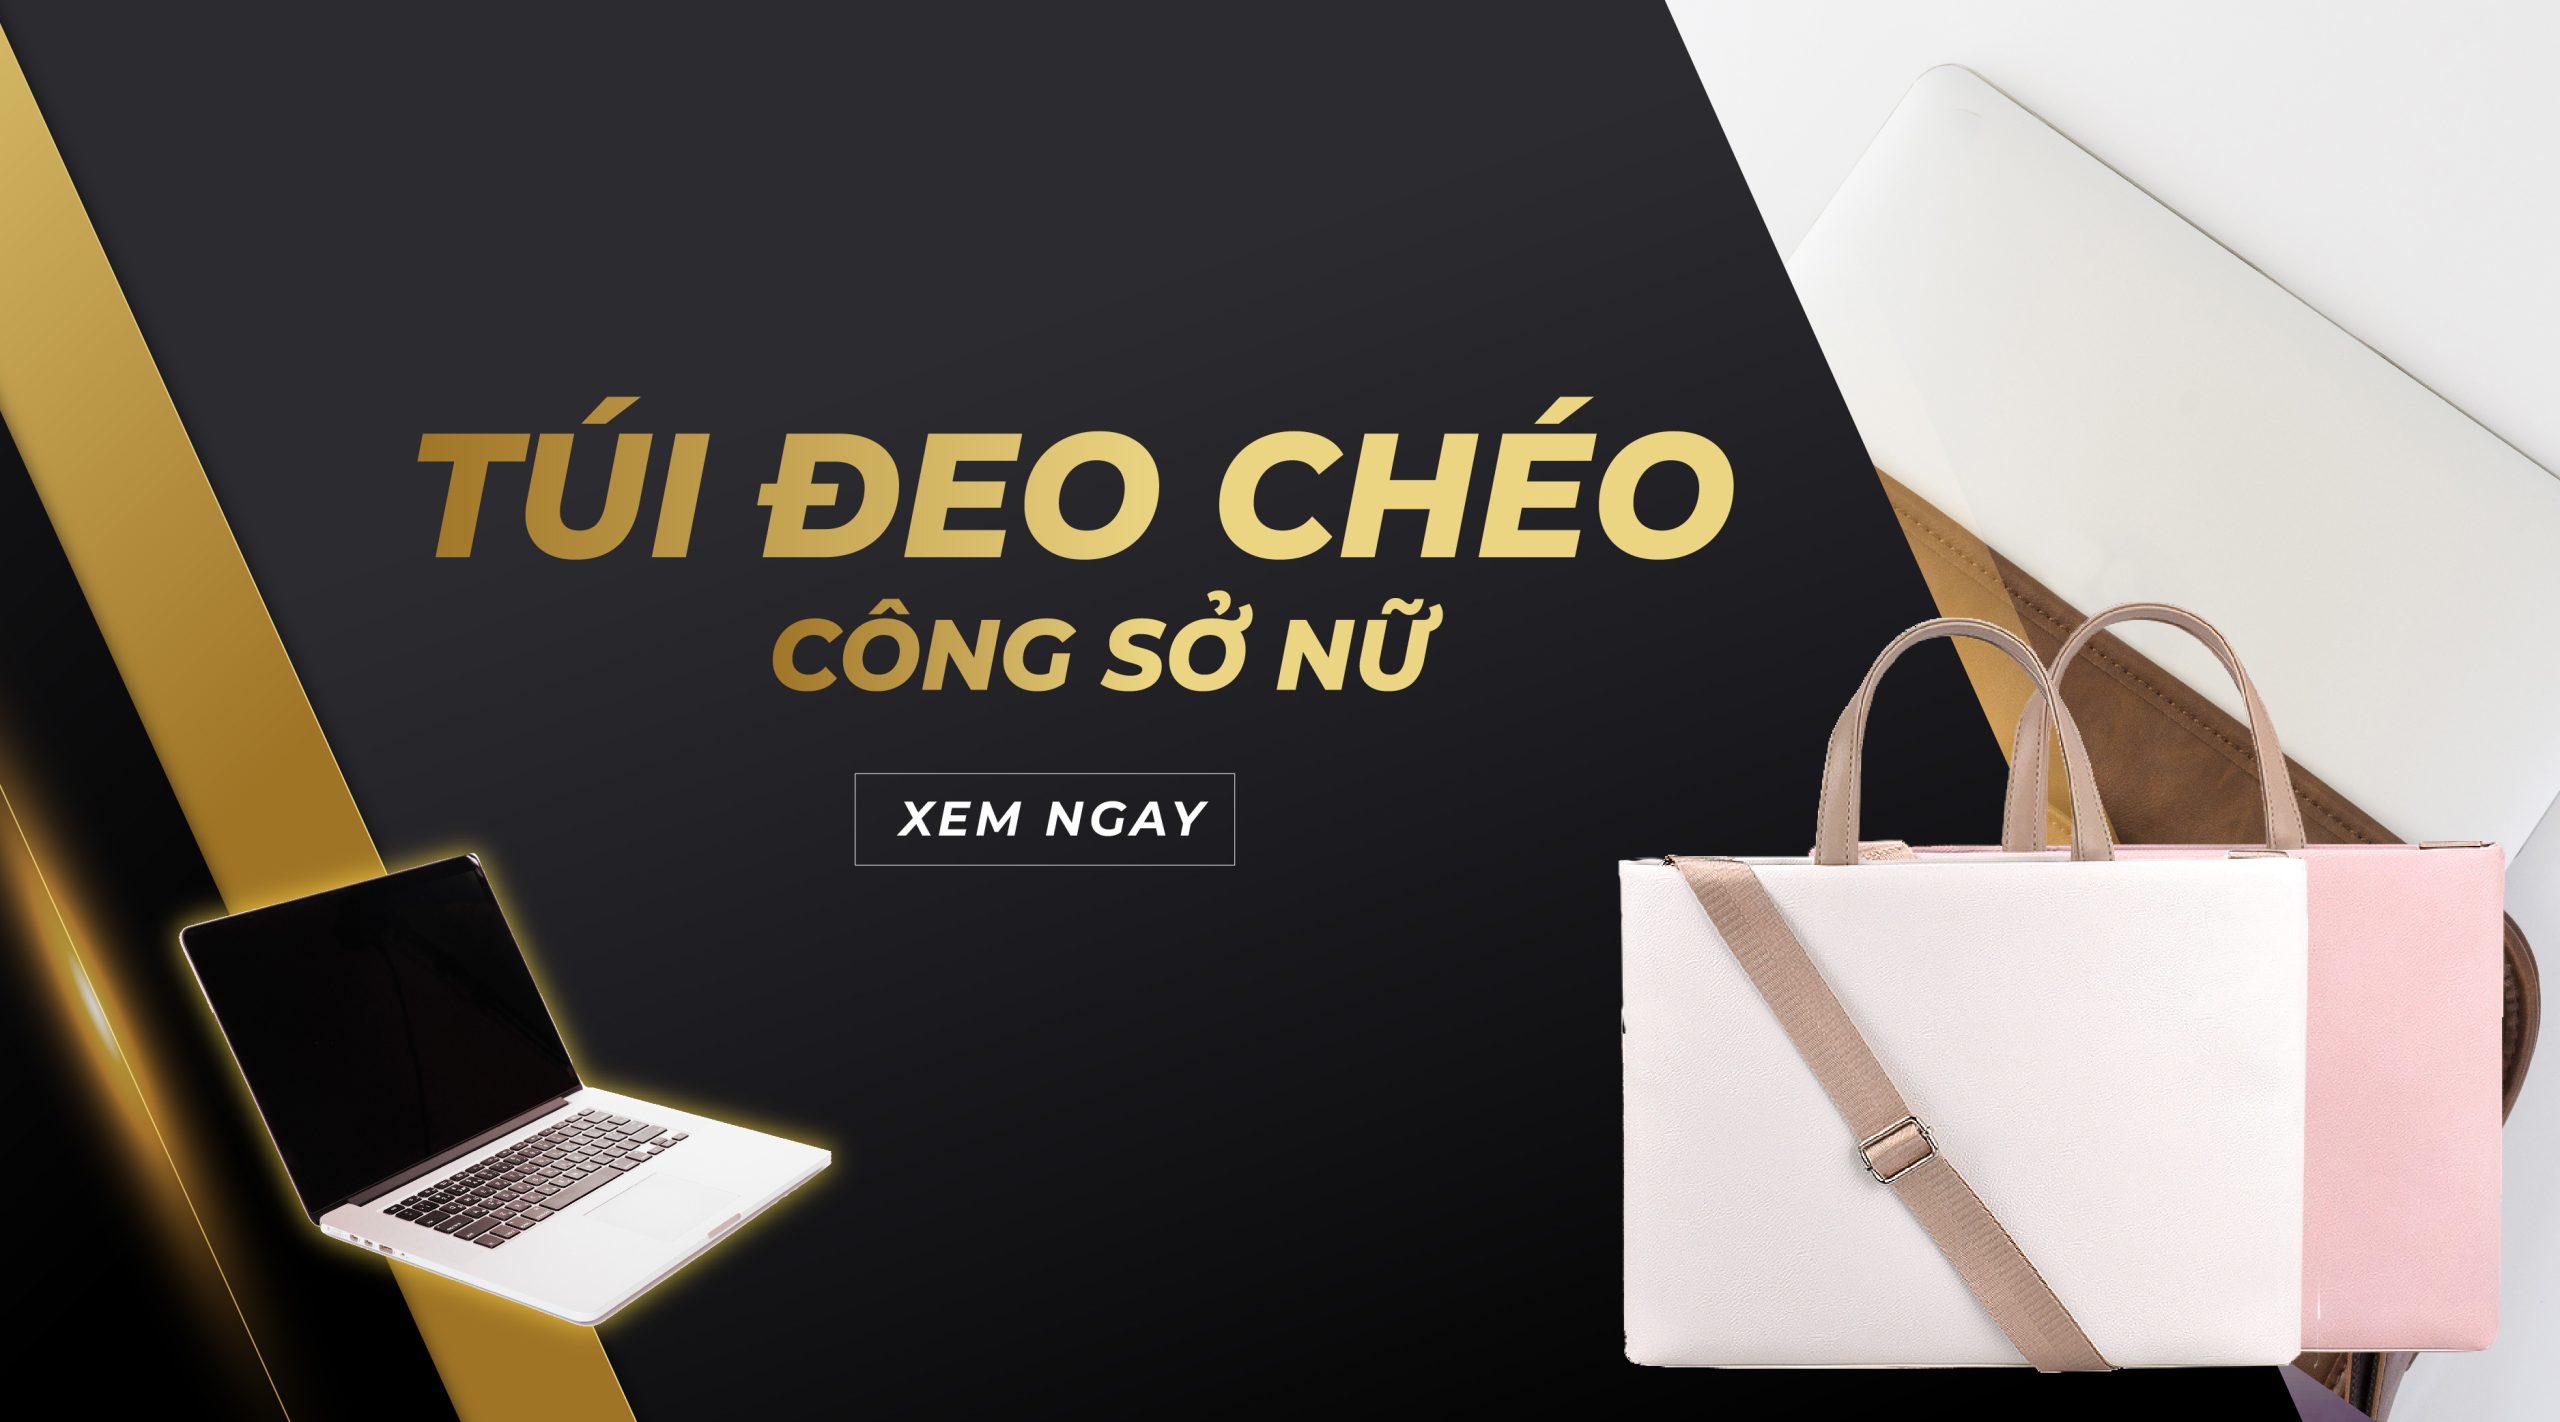 Tui-deo-cheo-cong-so-nu-05